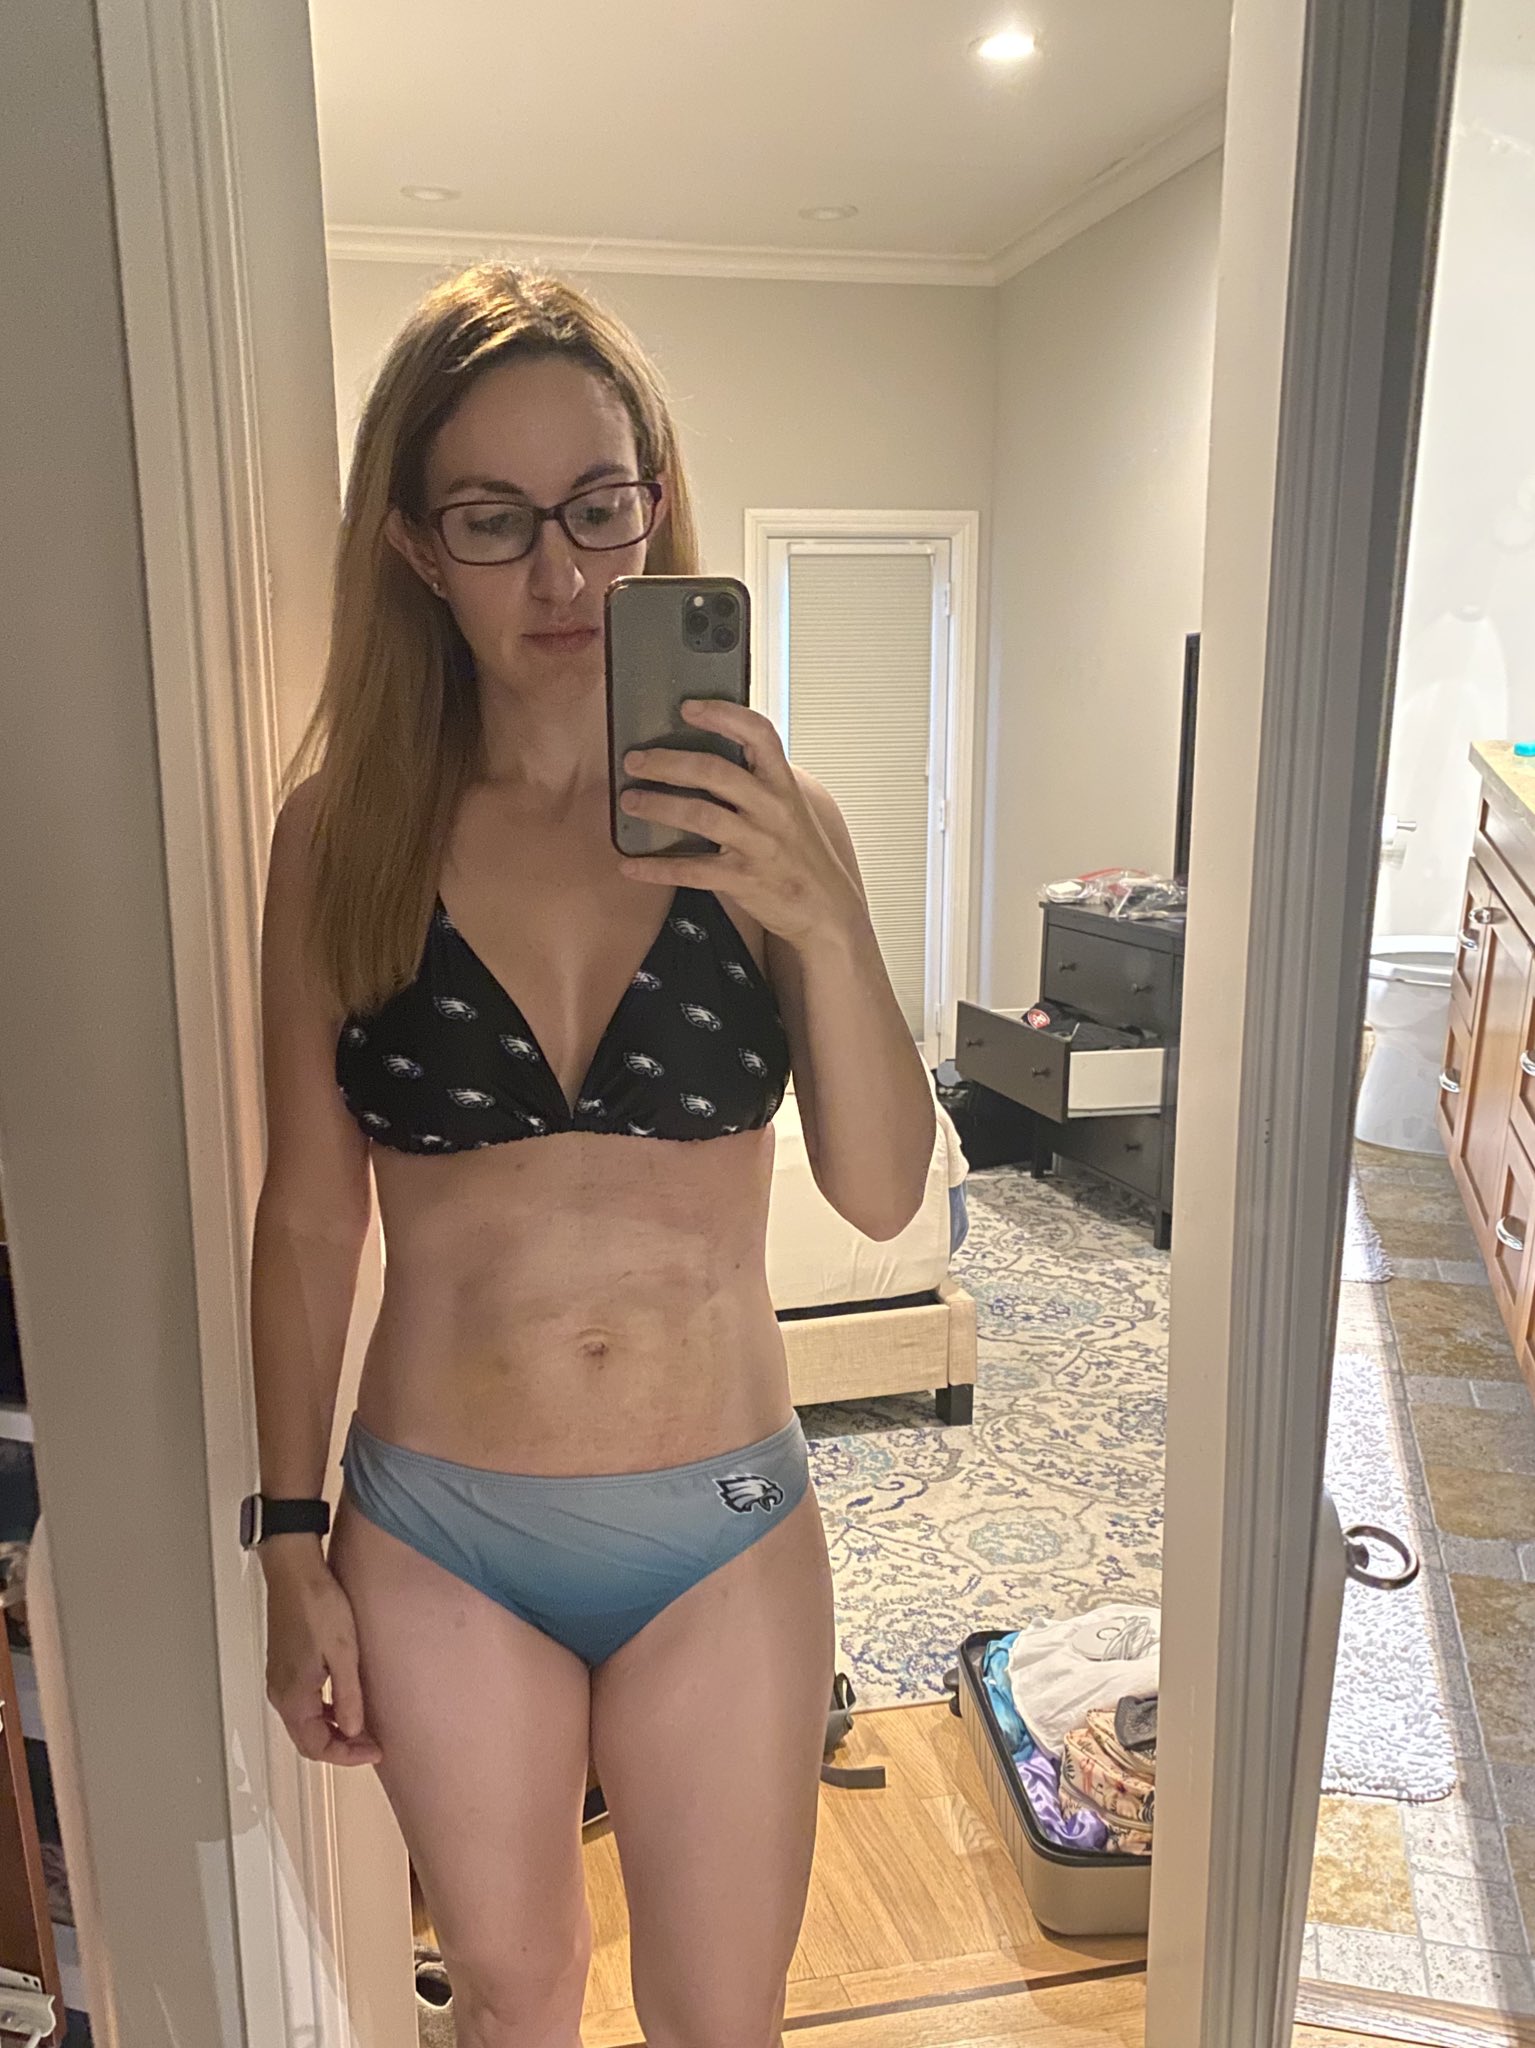 Sara Mauskopf on X: Smaller boobs thirst trap for a very niche audience  (ignore bruises on stomach, will heal) #FlyEaglesFly   / X